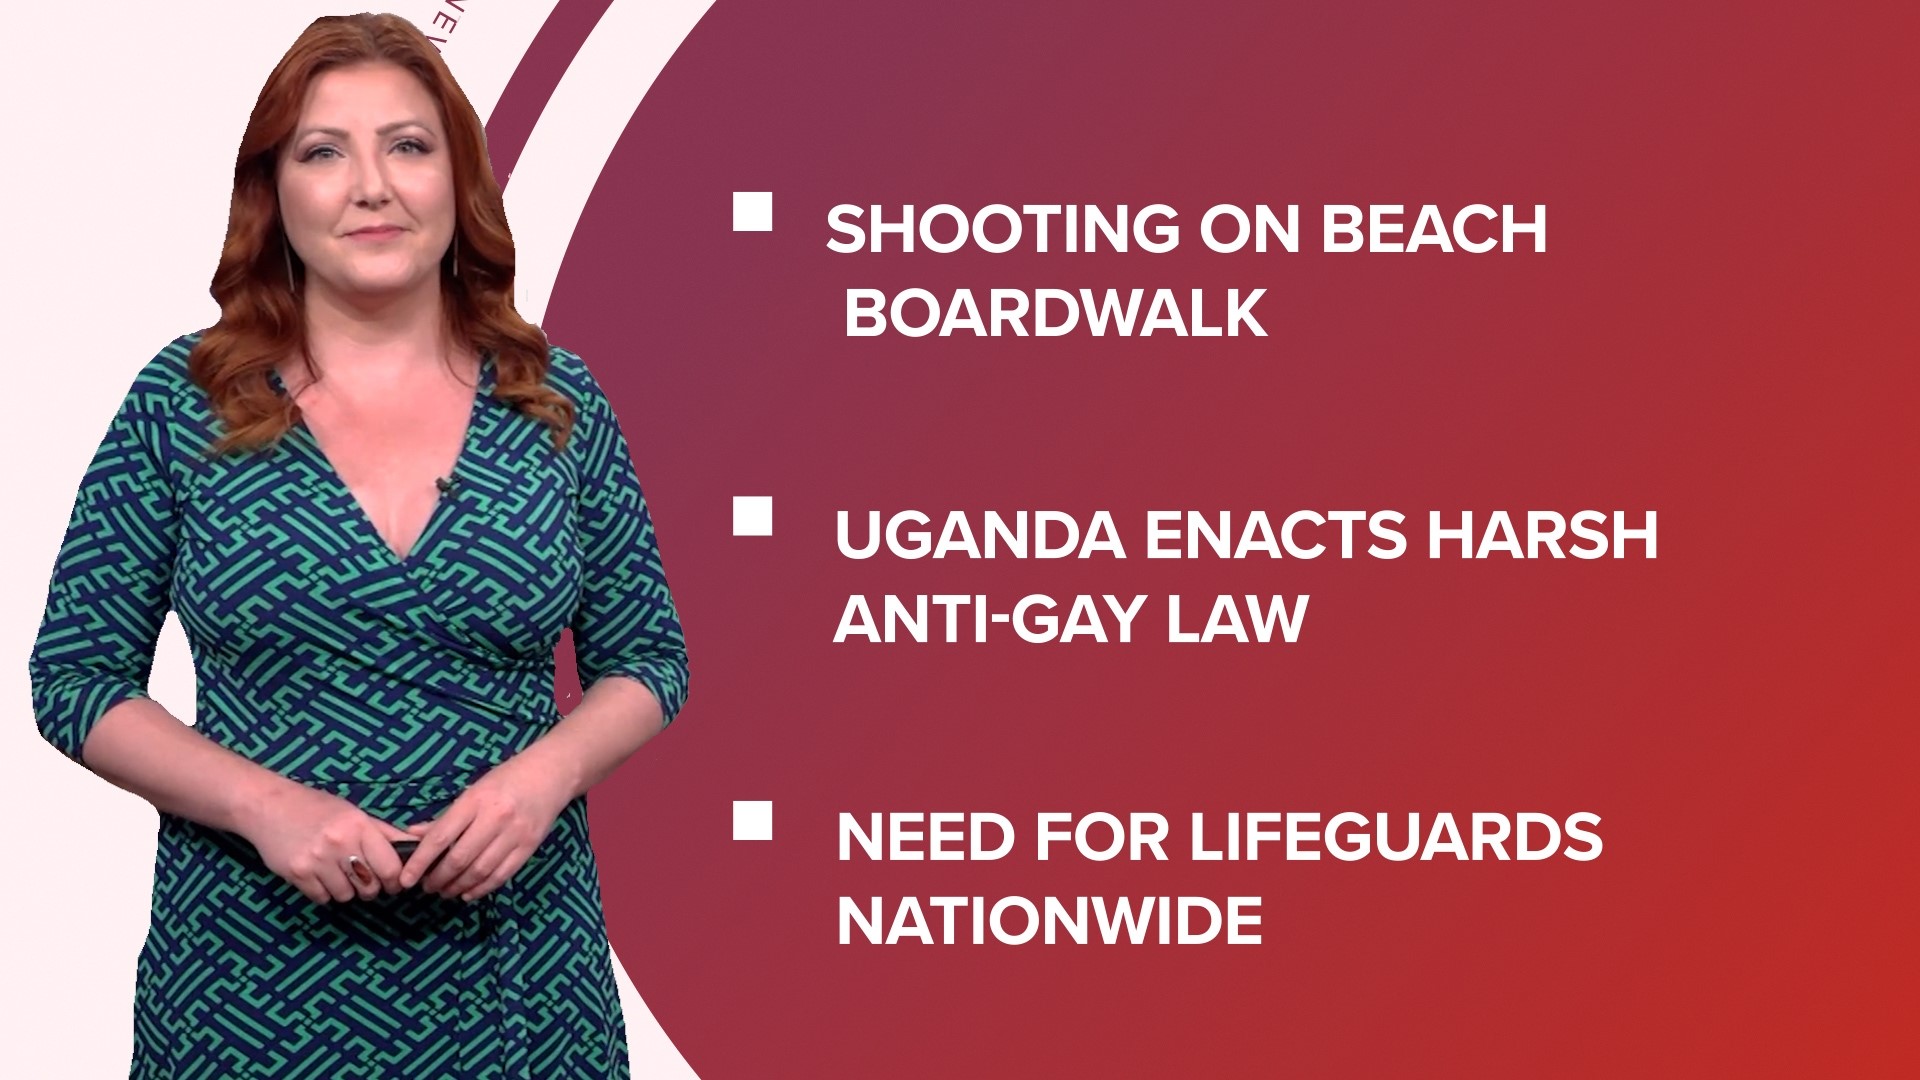 A look at what is happening in the news from a shooting on a boardwalk in Florida to Uganda's new anti-gay law and the NBA Finals match-up is set.